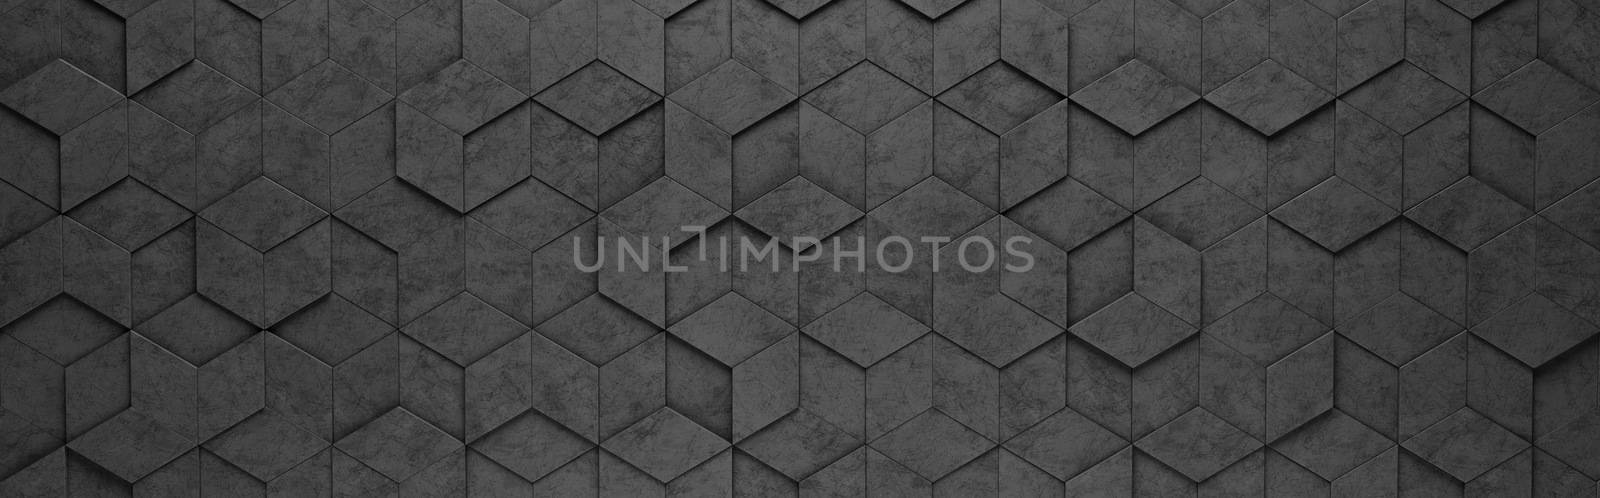 Wall of Black Rhombus and Hexagons Tiles Arranged in Random Height 3D Pattern Background Illustration